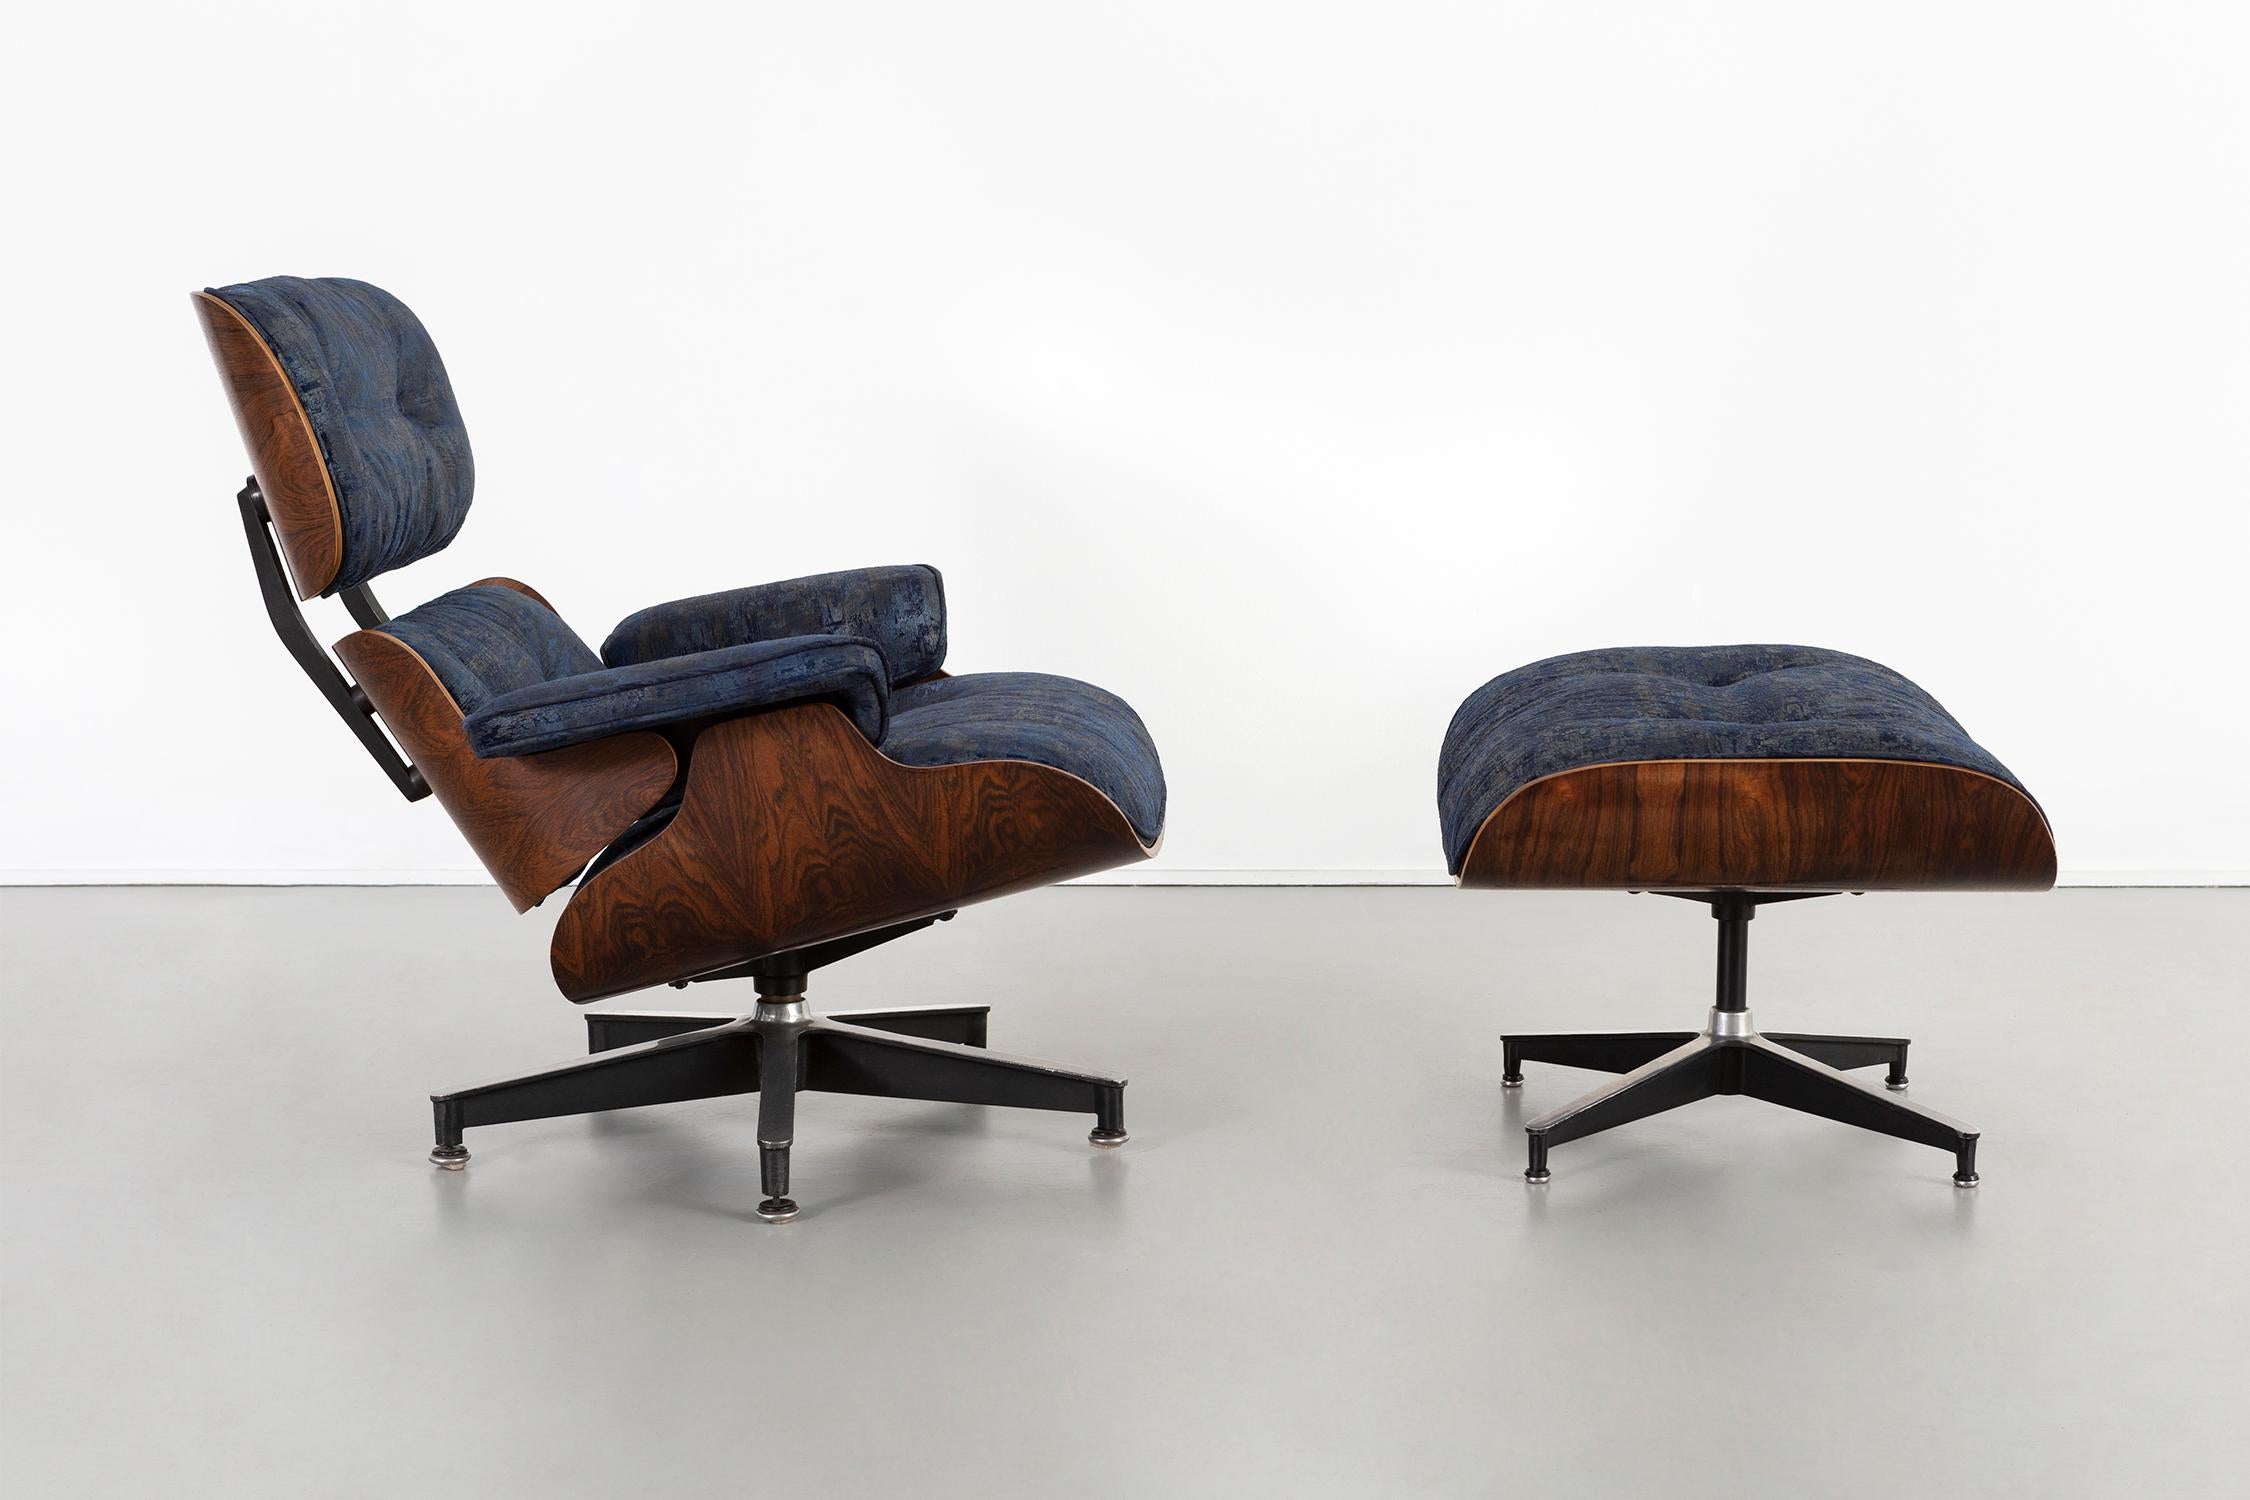 670 lounge chair and 671 ottoman

Designed by Charles and Ray Eames for Herman Miller 

USA, circa 1950s

Rosewood, aluminum and cotton velvet blend

The chair and ottoman are down filled. 

Cotton velvet blend fabric made in Italy, spray